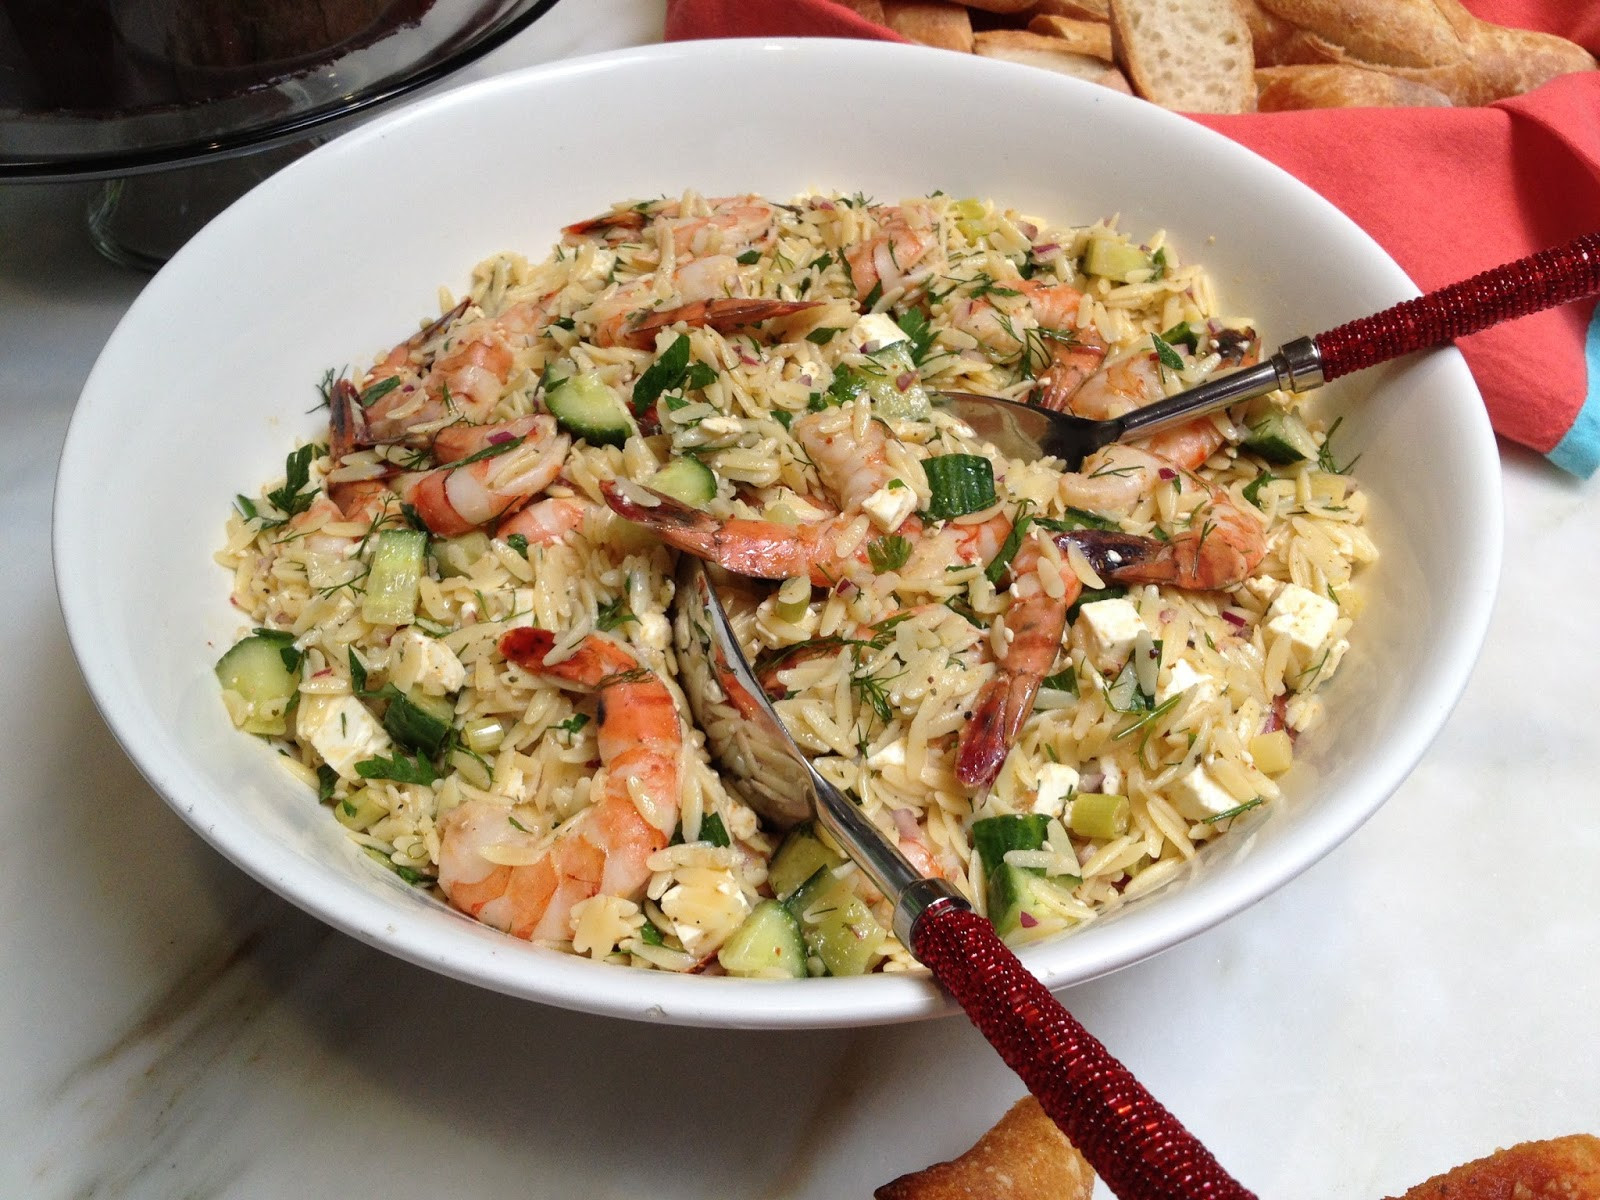 Ina Garten Shrimp Salad
 Two Salads adapted from Ina Garten Roasted Shrimp and